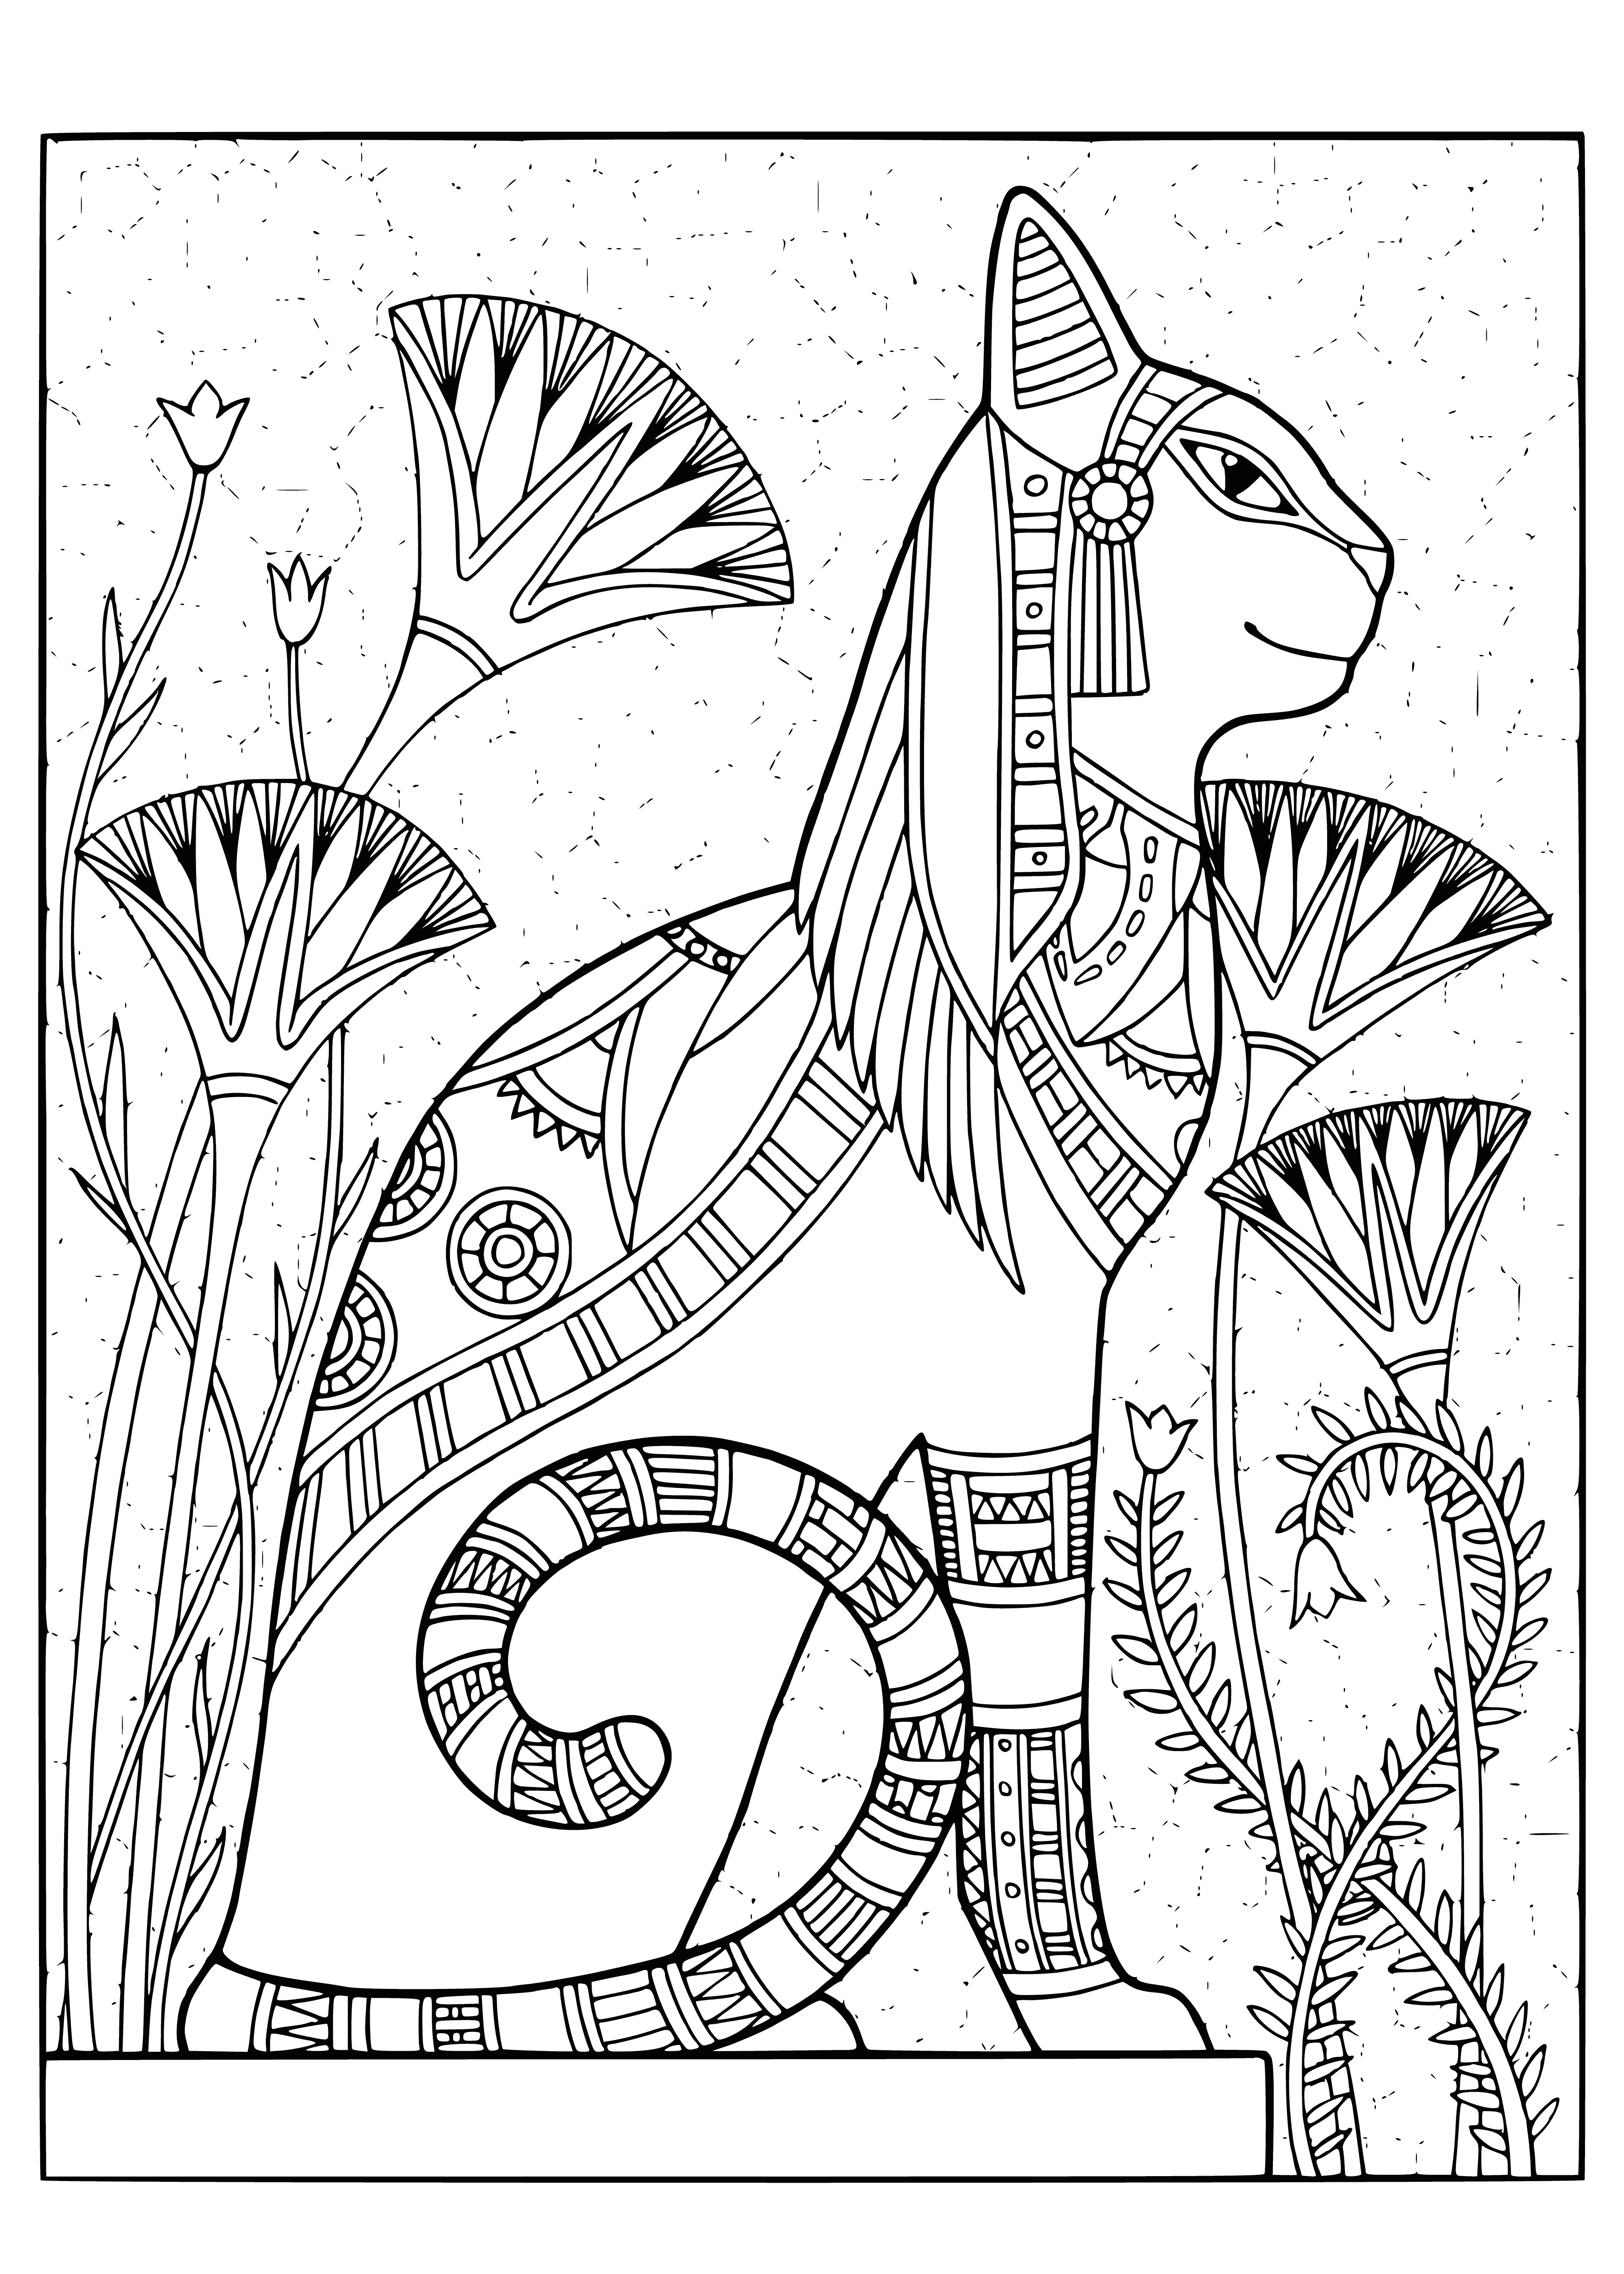 coloring page: Regal cat lounges on cushion among coins, gazing into distance with deep black coat, white highlights, and green eyes.